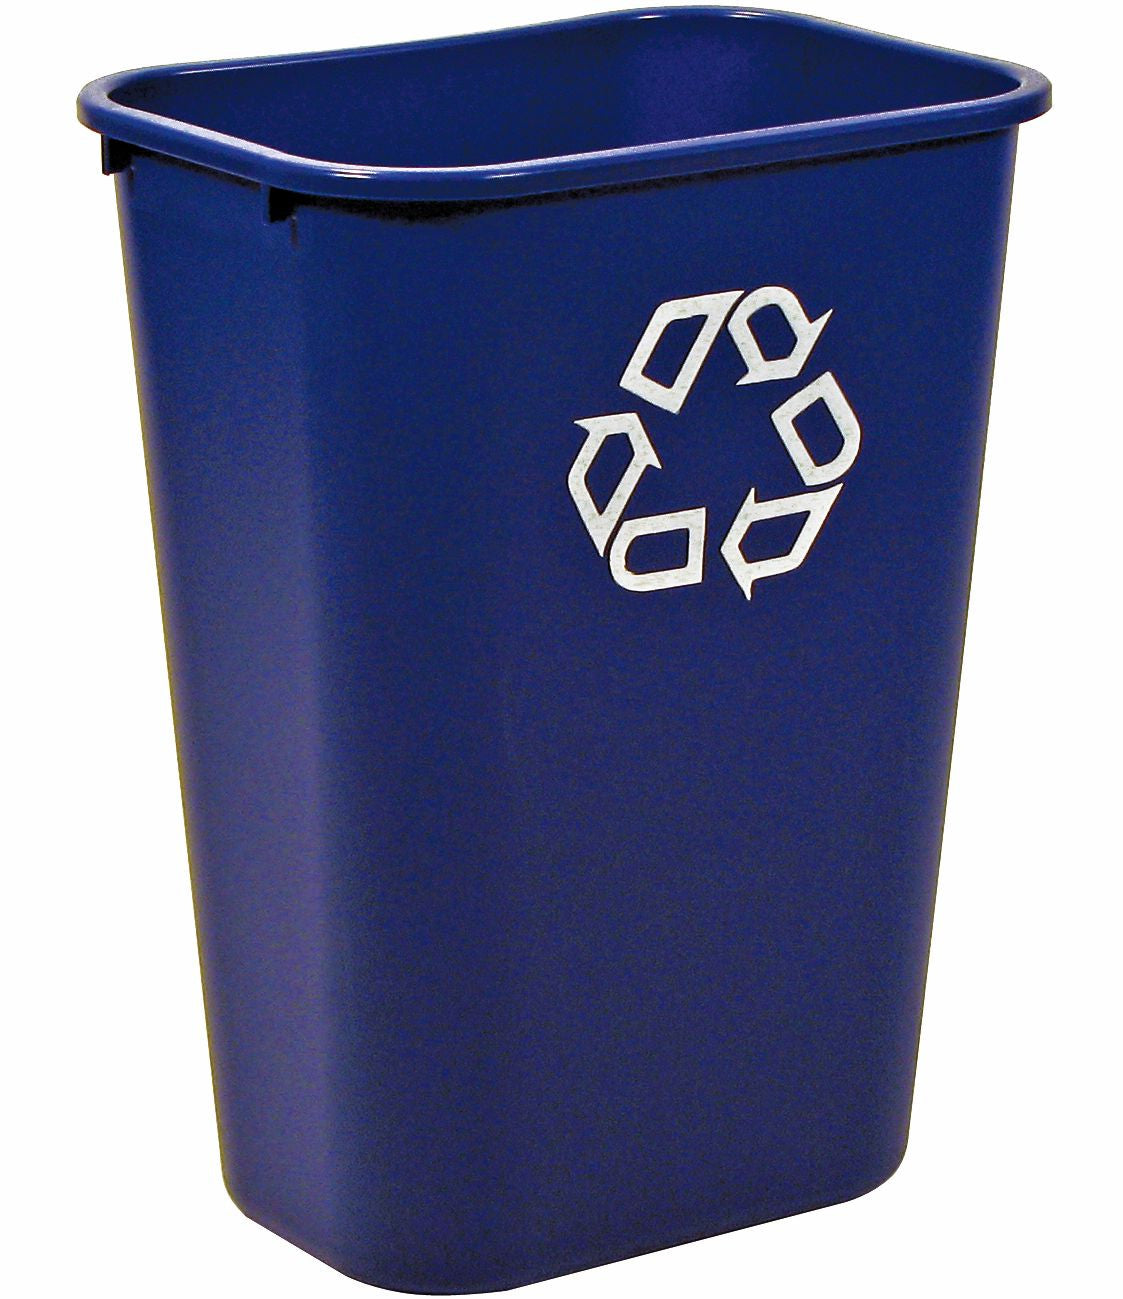 RECYCLING CONT. 41¼qt BLUE W/UNIVERSAL RECYCLE SYMBOL